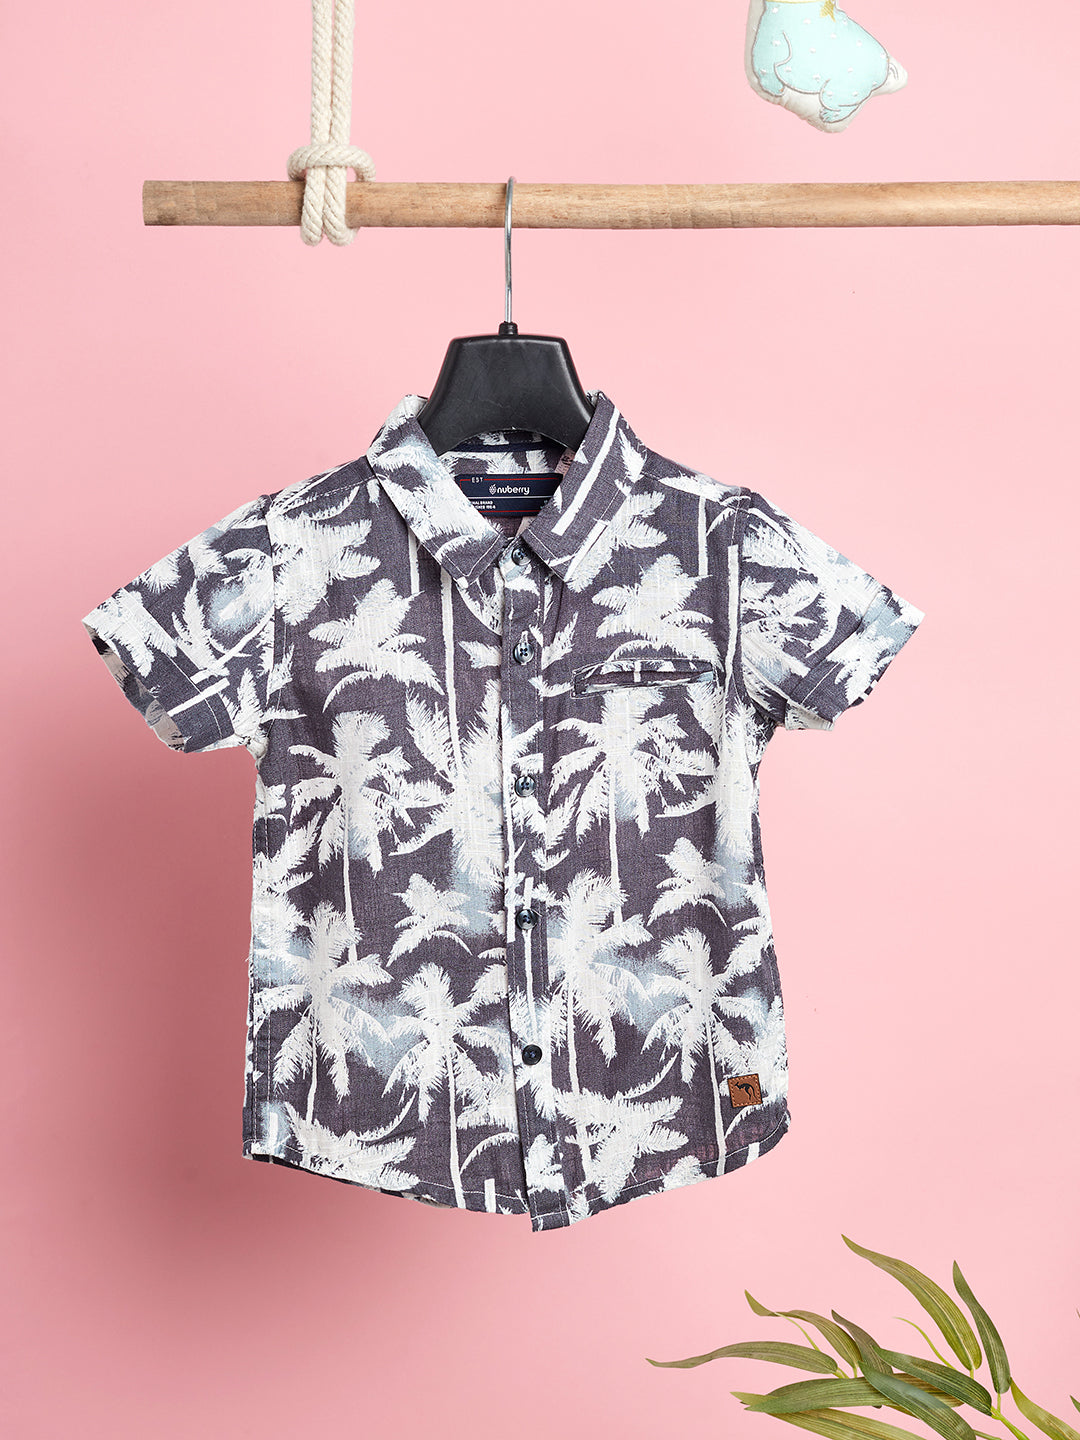 Nuberry Boys Shirt Half Sleeve - Navy Blue with White Leaf Printed